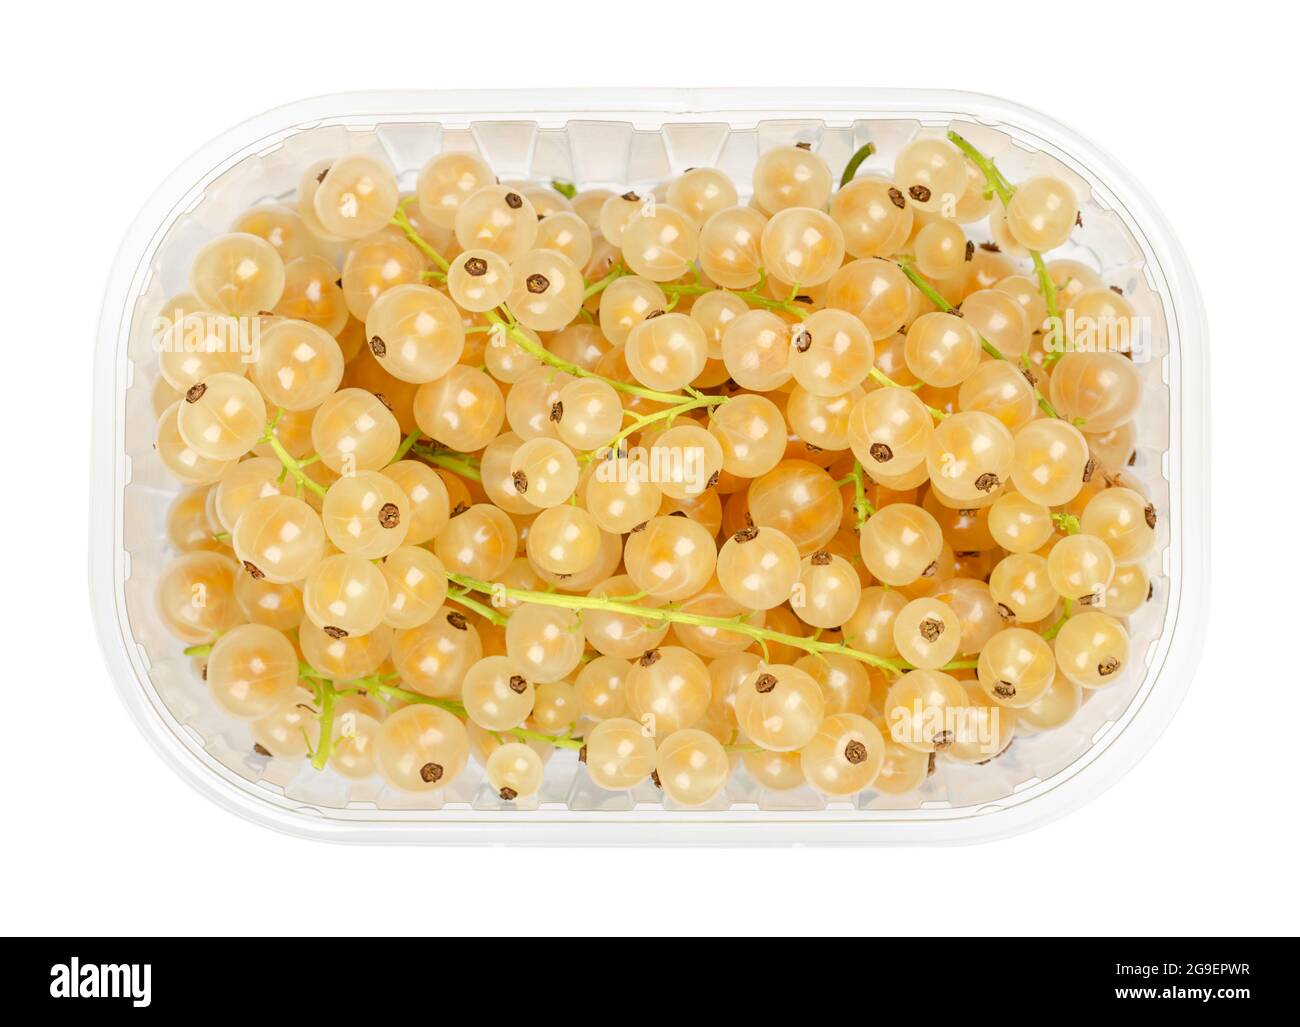 White currant berries, in a plastic container. Fresh ripe whitecurrant berries, spherical edible fruits of Ribes rubrum, a red currant cultivar. Stock Photo